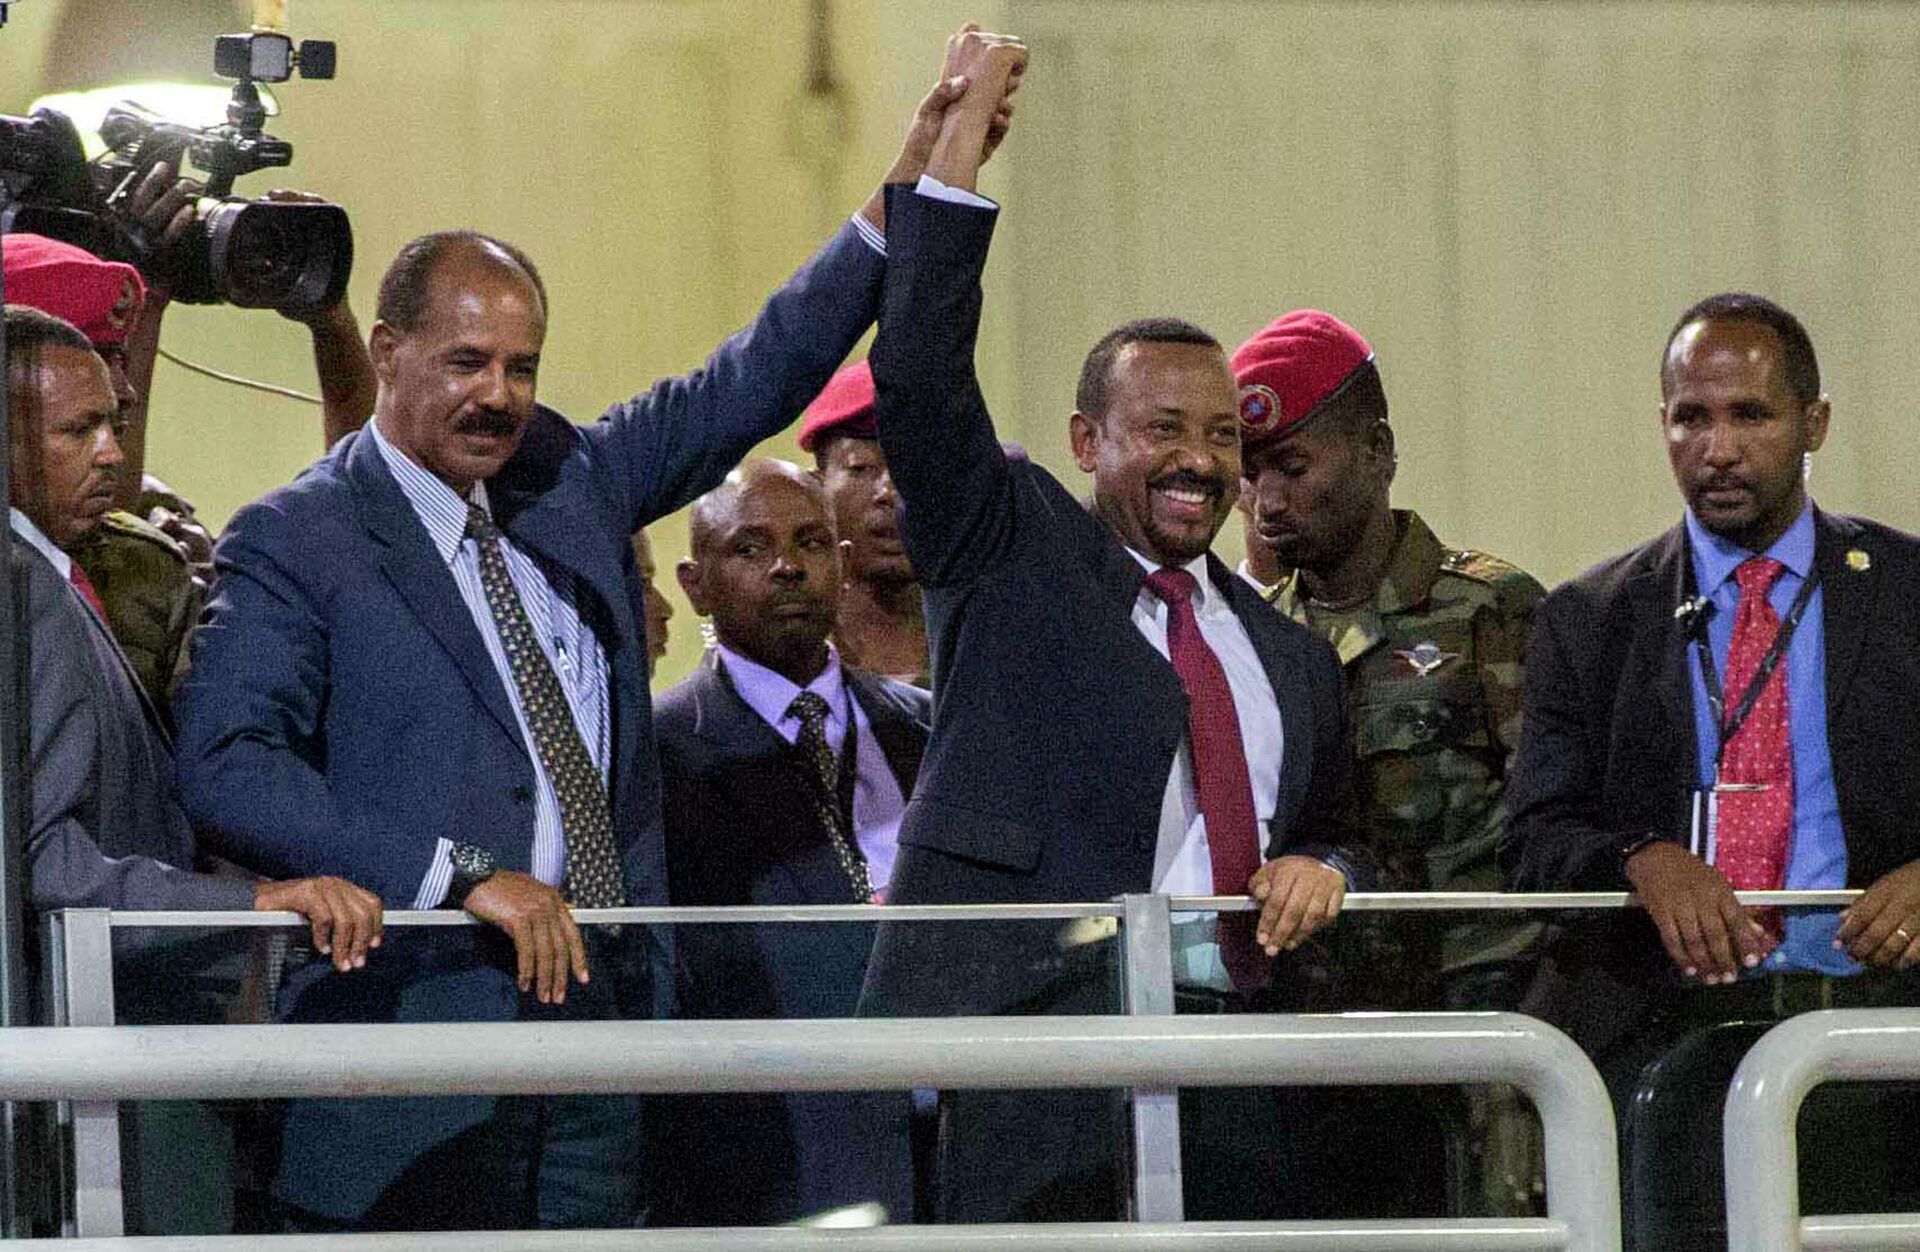 In this Sunday July 15, 2018 file photo, Eritrean President Isaias Afwerki, second left, and Ethiopia's Prime Minister Abiy Ahmed, center, hold hands as they wave at the crowds in Addis Ababa, Ethiopia. Once official rivals, the leaders of Ethiopia and Eritrea have embraced warmly to the roar of a crowd of thousands at a concert celebrating the end of a long state of war. The 2019 Nobel Peace Prize was given to Ethiopian Prime Minister Abiy Ahmed on Friday Oct. 11, 2019. - Sputnik International, 1920, 24.08.2022